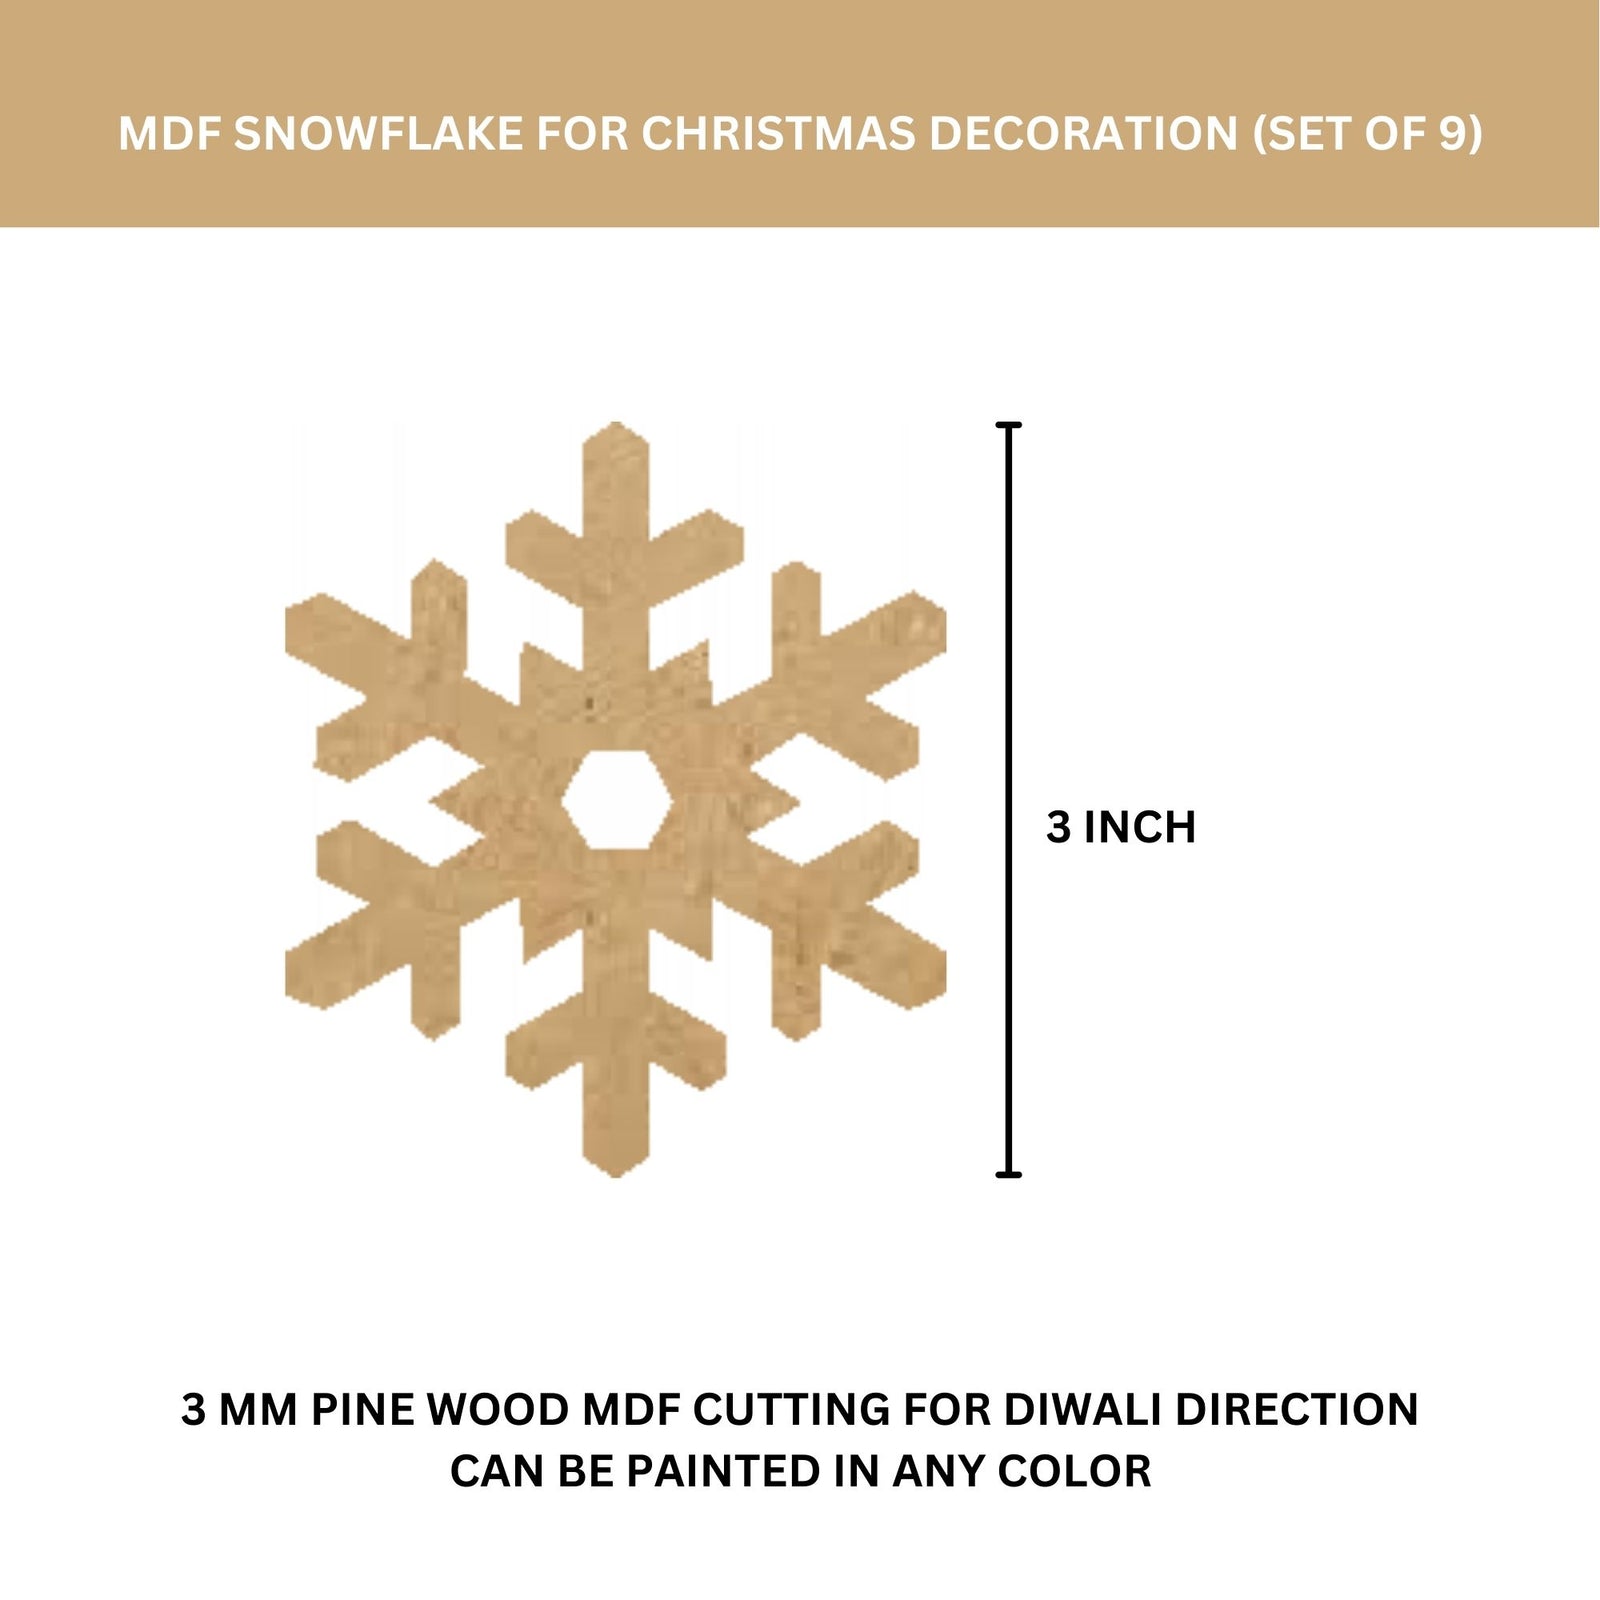 Mdf Snowflake For Christmas Decoration - Set of 9